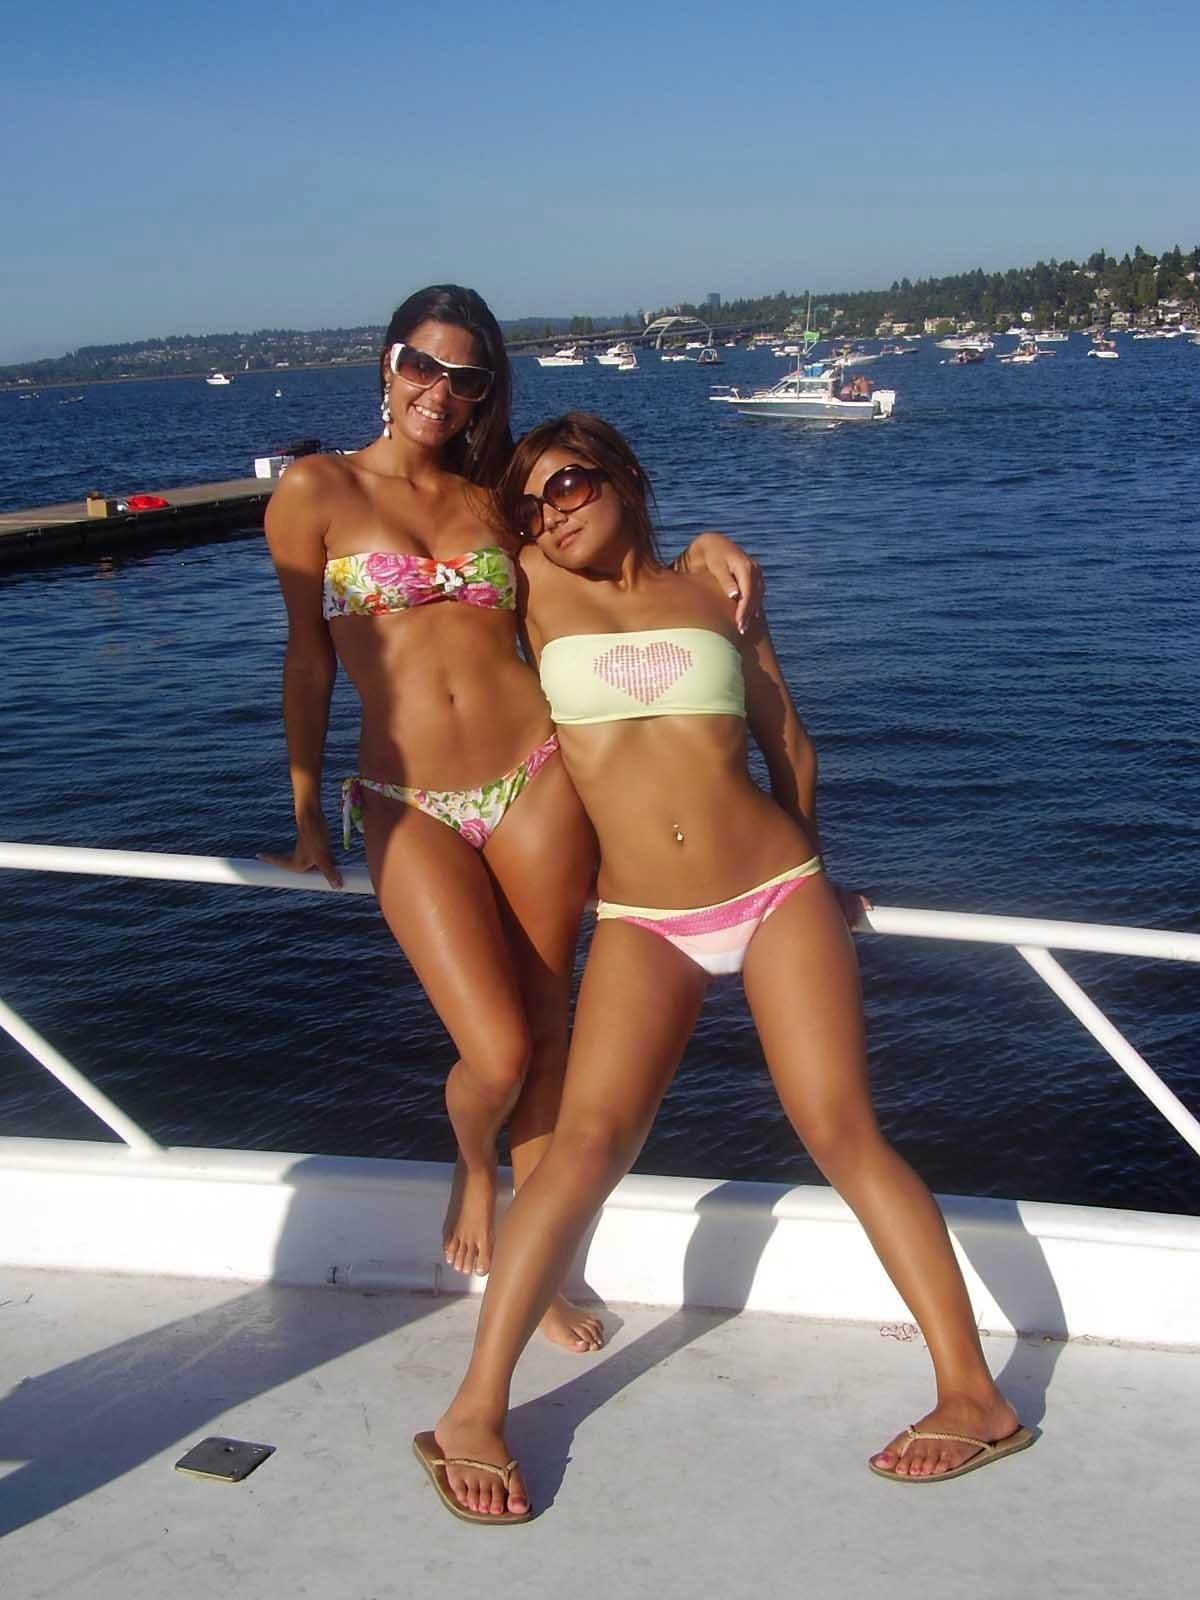 Slutty Amateur Bikini Chicks Partying On A Big Boat While On Vacation.